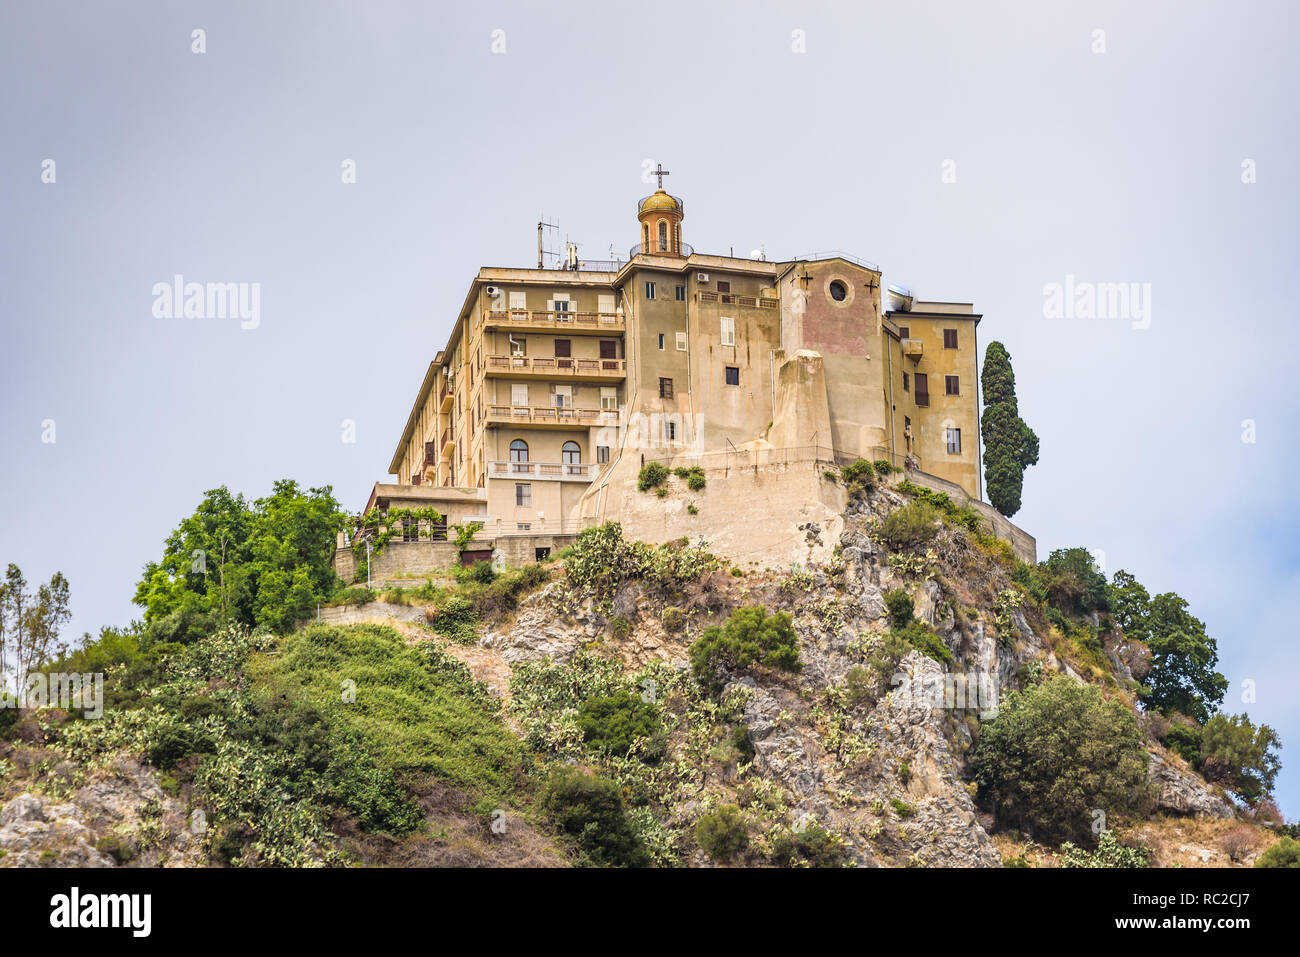 Facade and dome of the Tindari Sanctuary, built on a cliff with sheer drop on the sea and panoramic views of the Aeolian Islands and the gulf of Patti Stock Photo